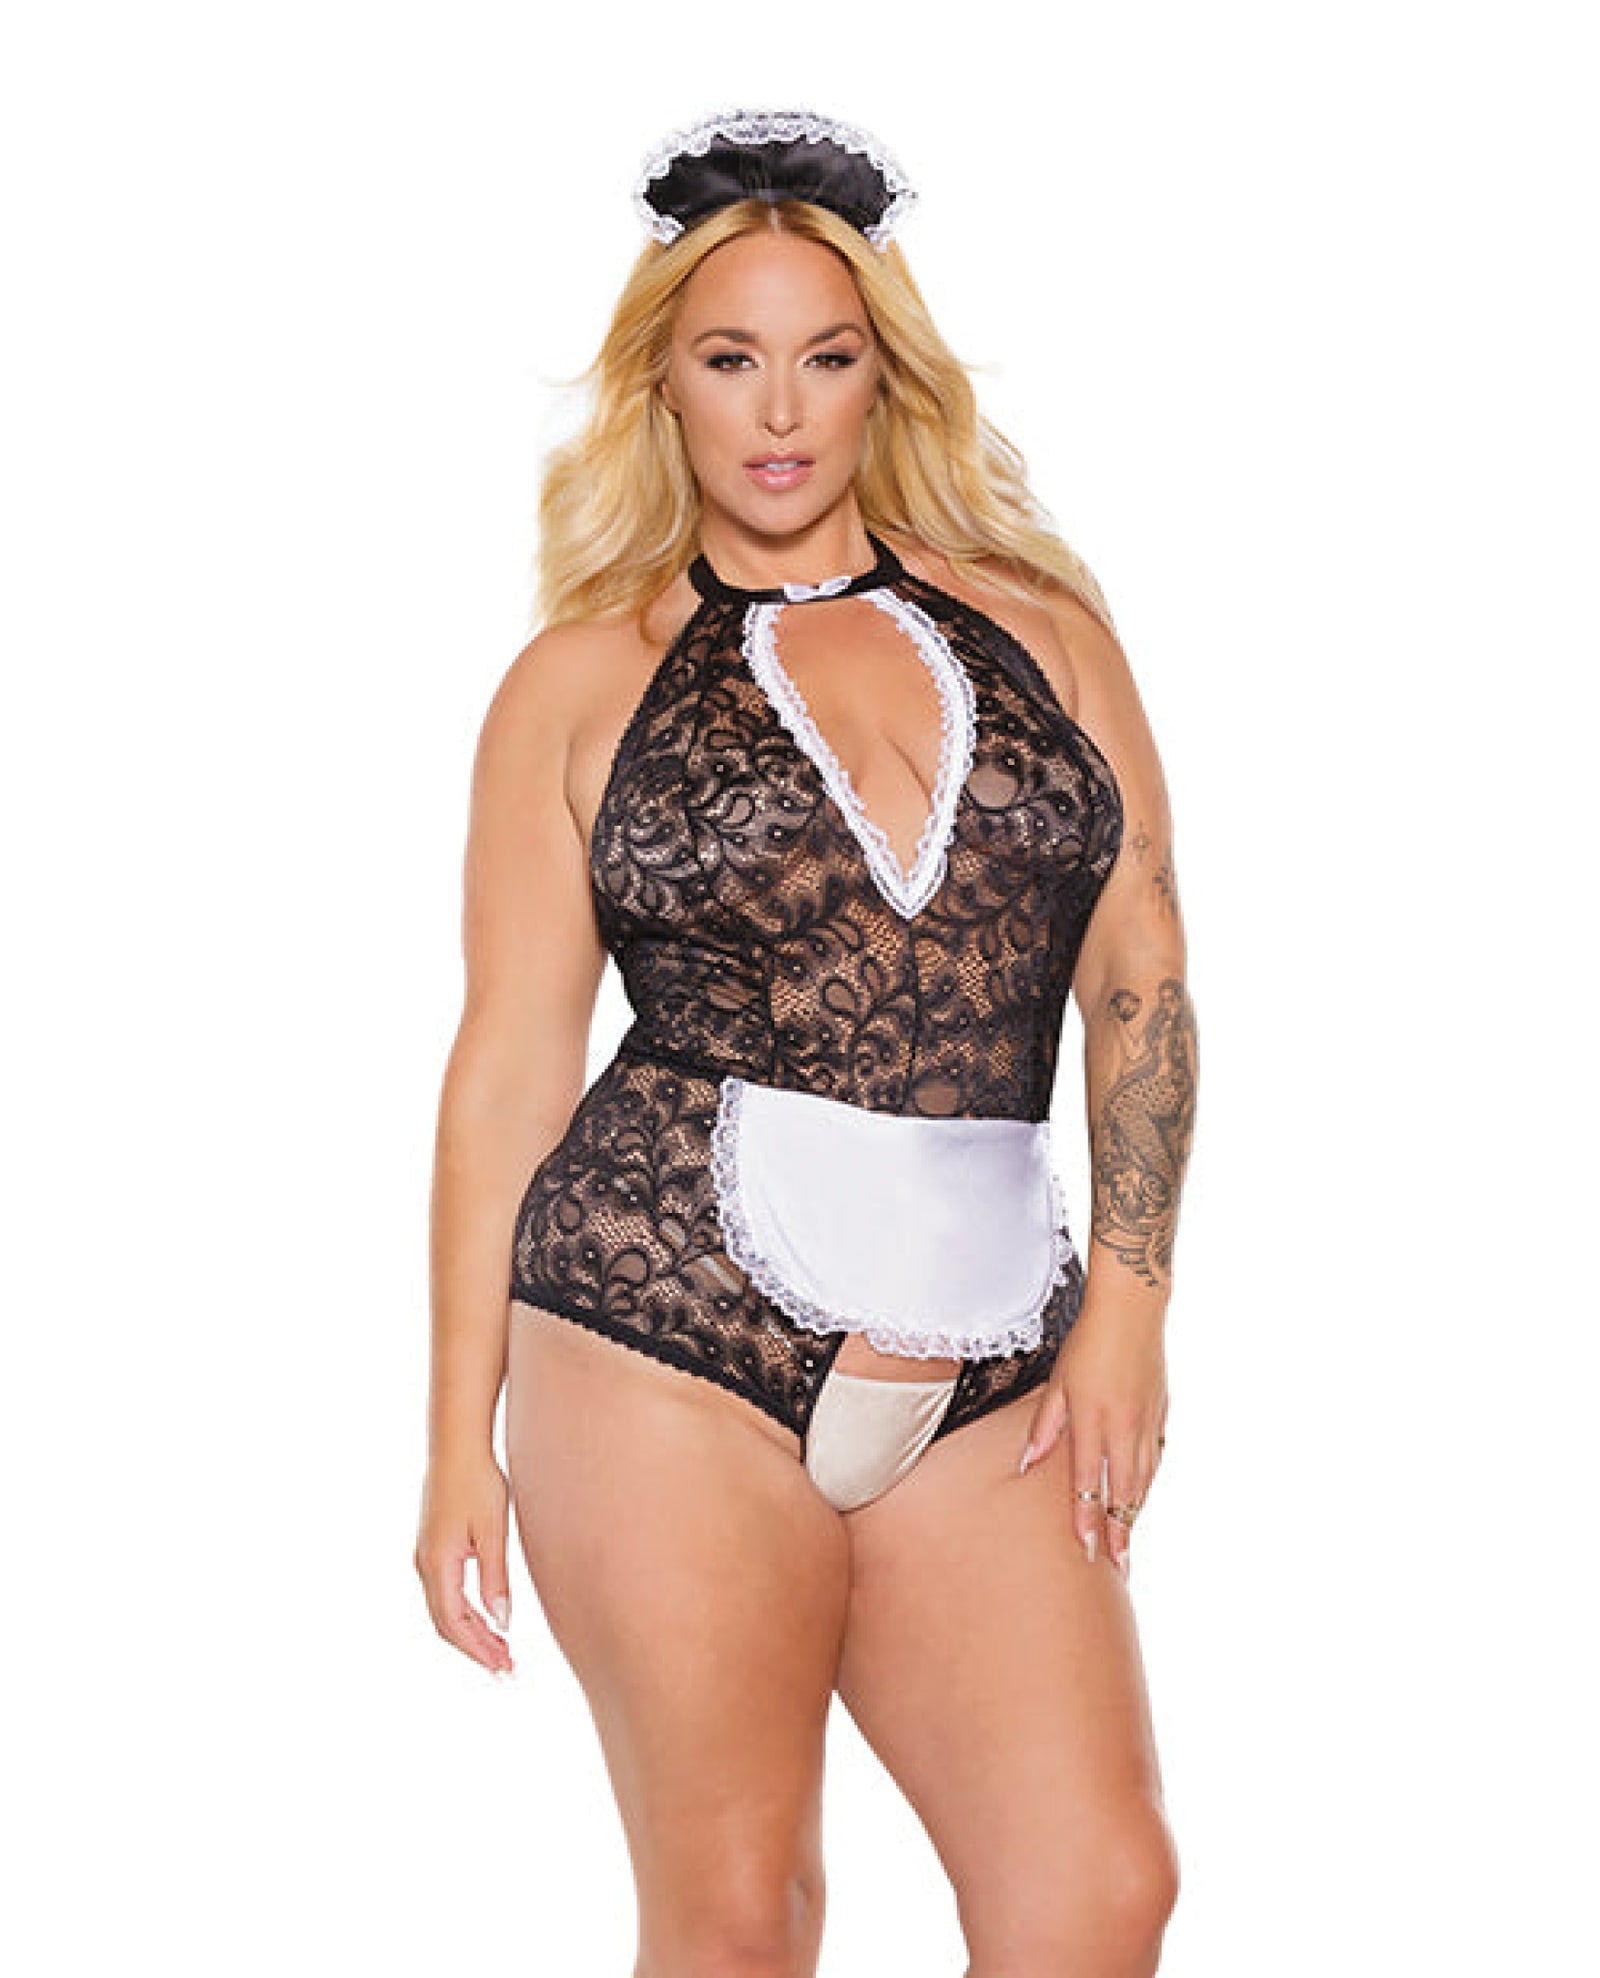 Scallop Stretch Lace Crotchless Maid Teddy W/headpiece Black/white Os/xl Coquette